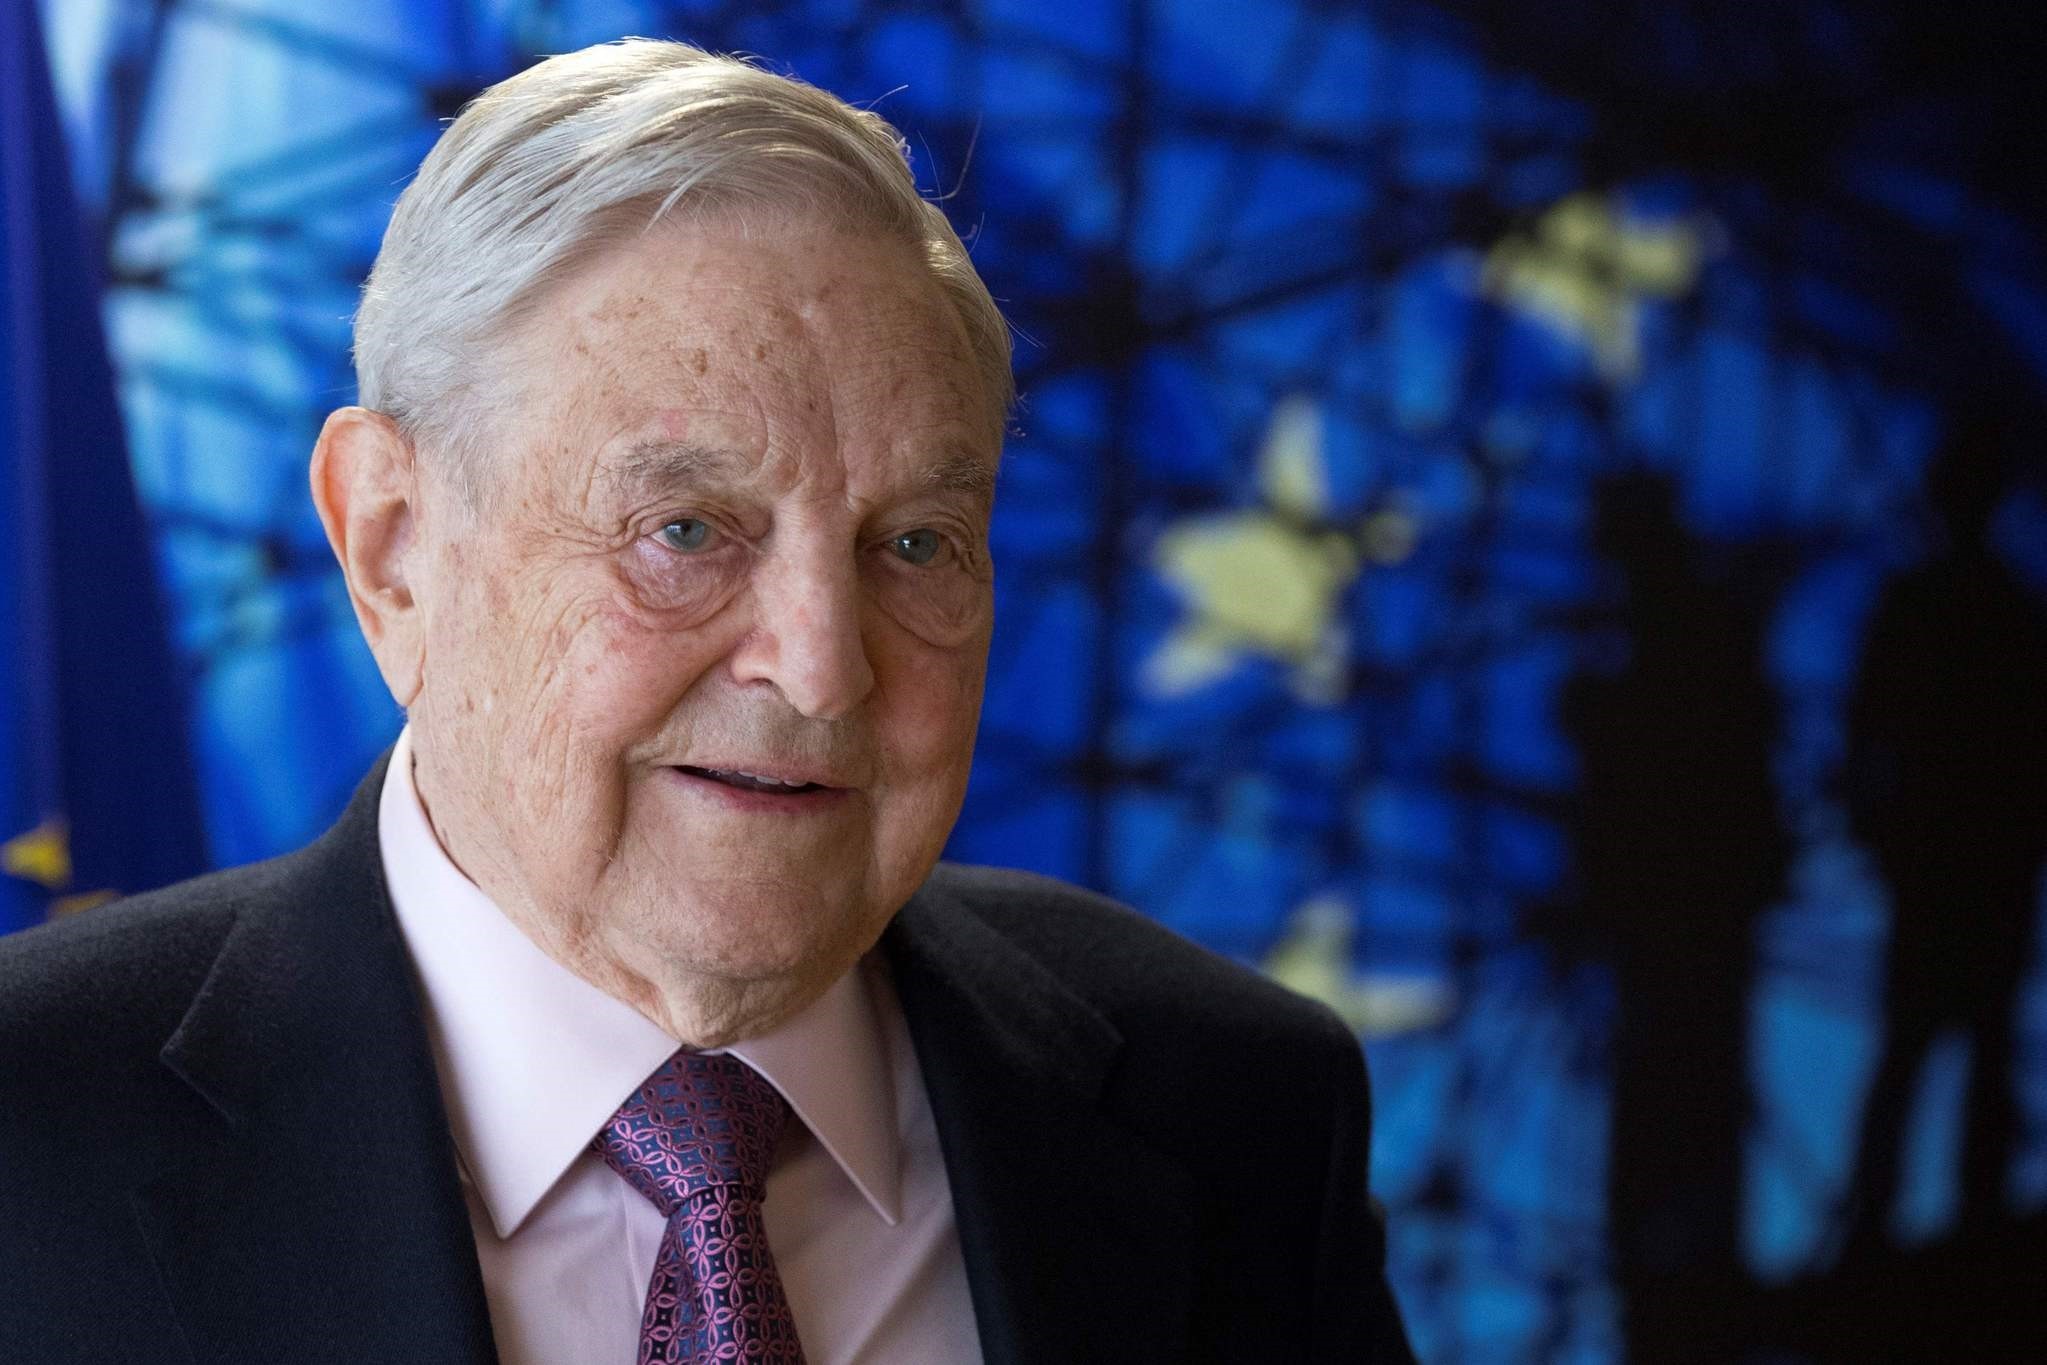 This file photo taken on April 27, 2017 shows US financier-cum-philanthropist George Soros, Founder and Chairman of the Open Society Foundations, arriving for a meeting in Brussels. (AFP Photo)